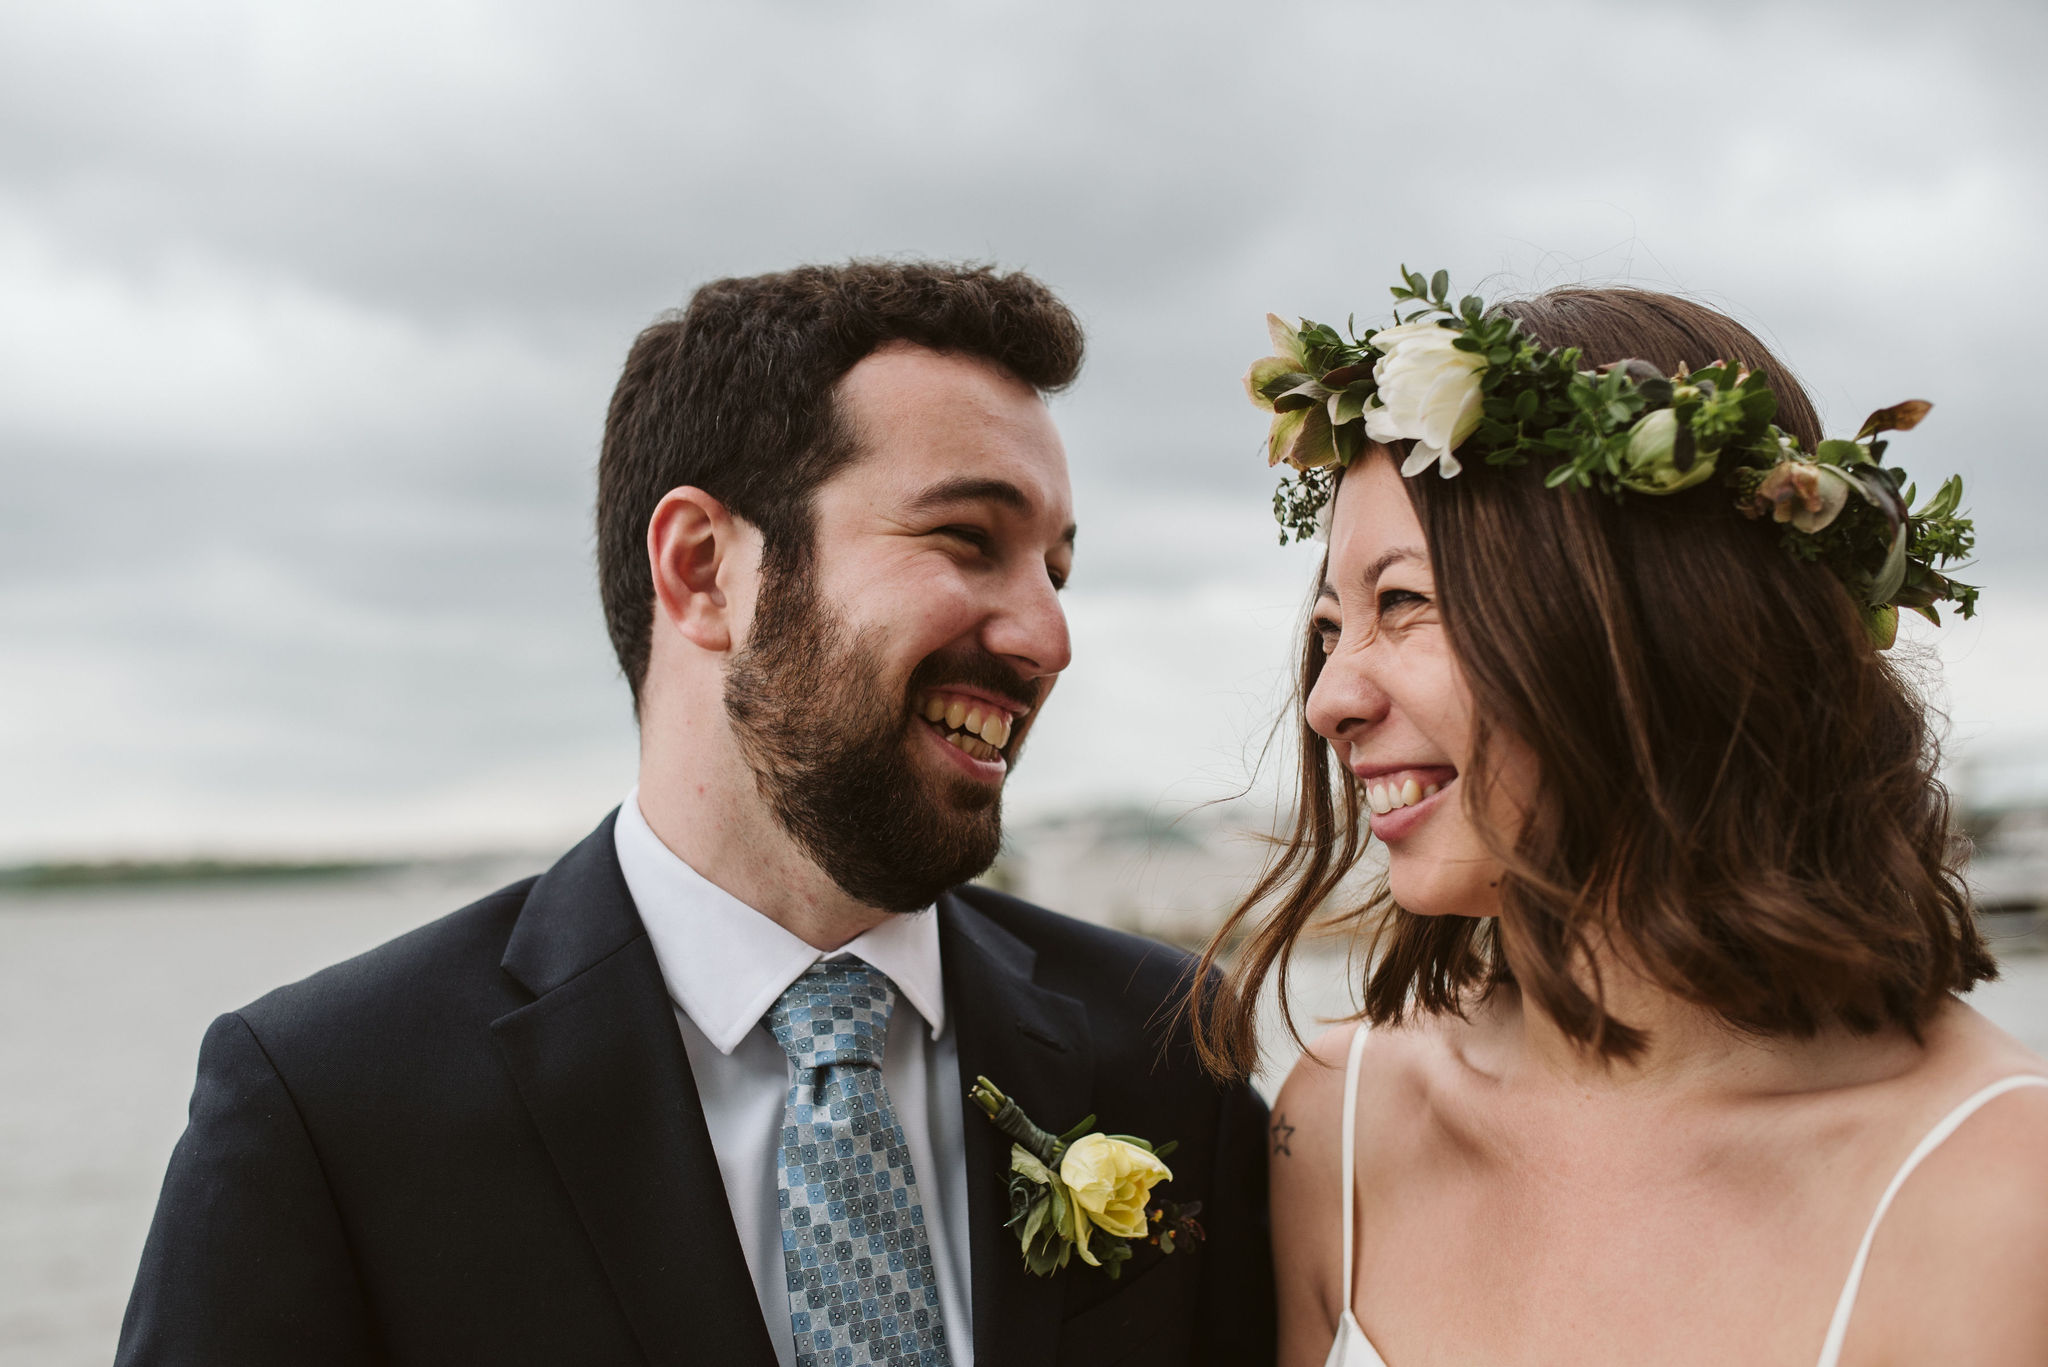  Washington DC, Baltimore Wedding Photographer, Alexandria, Old Town, Jewel Tone, Romantic, Modern, Portrait of Bride and Groom Smiling at Each Other, Flower Crown 